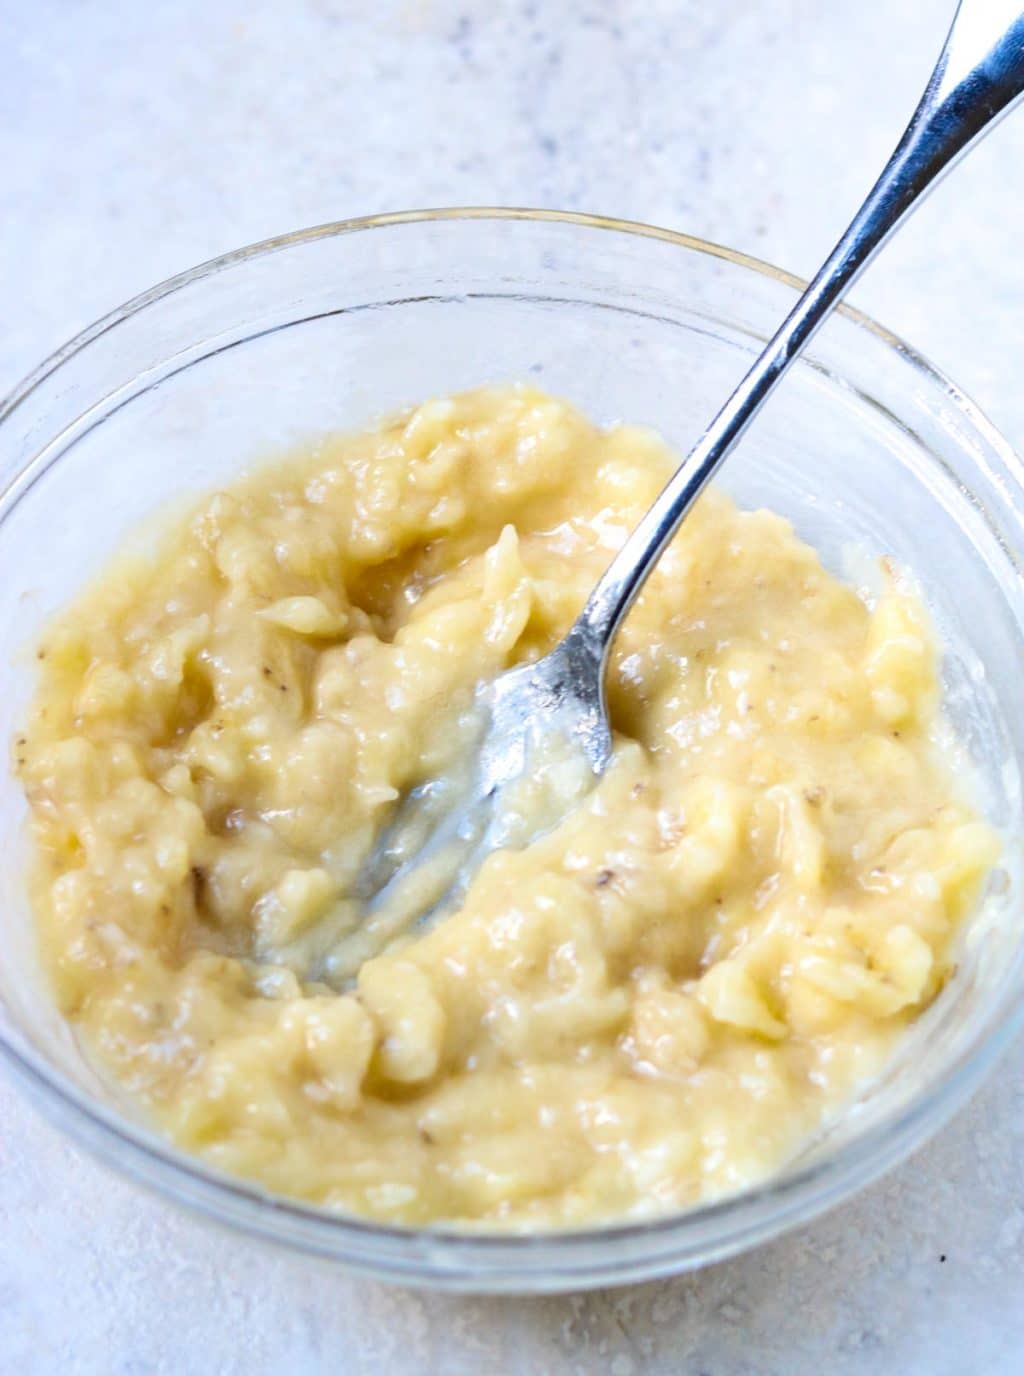 Over-ripe bananas mashed in a bowl with a fork